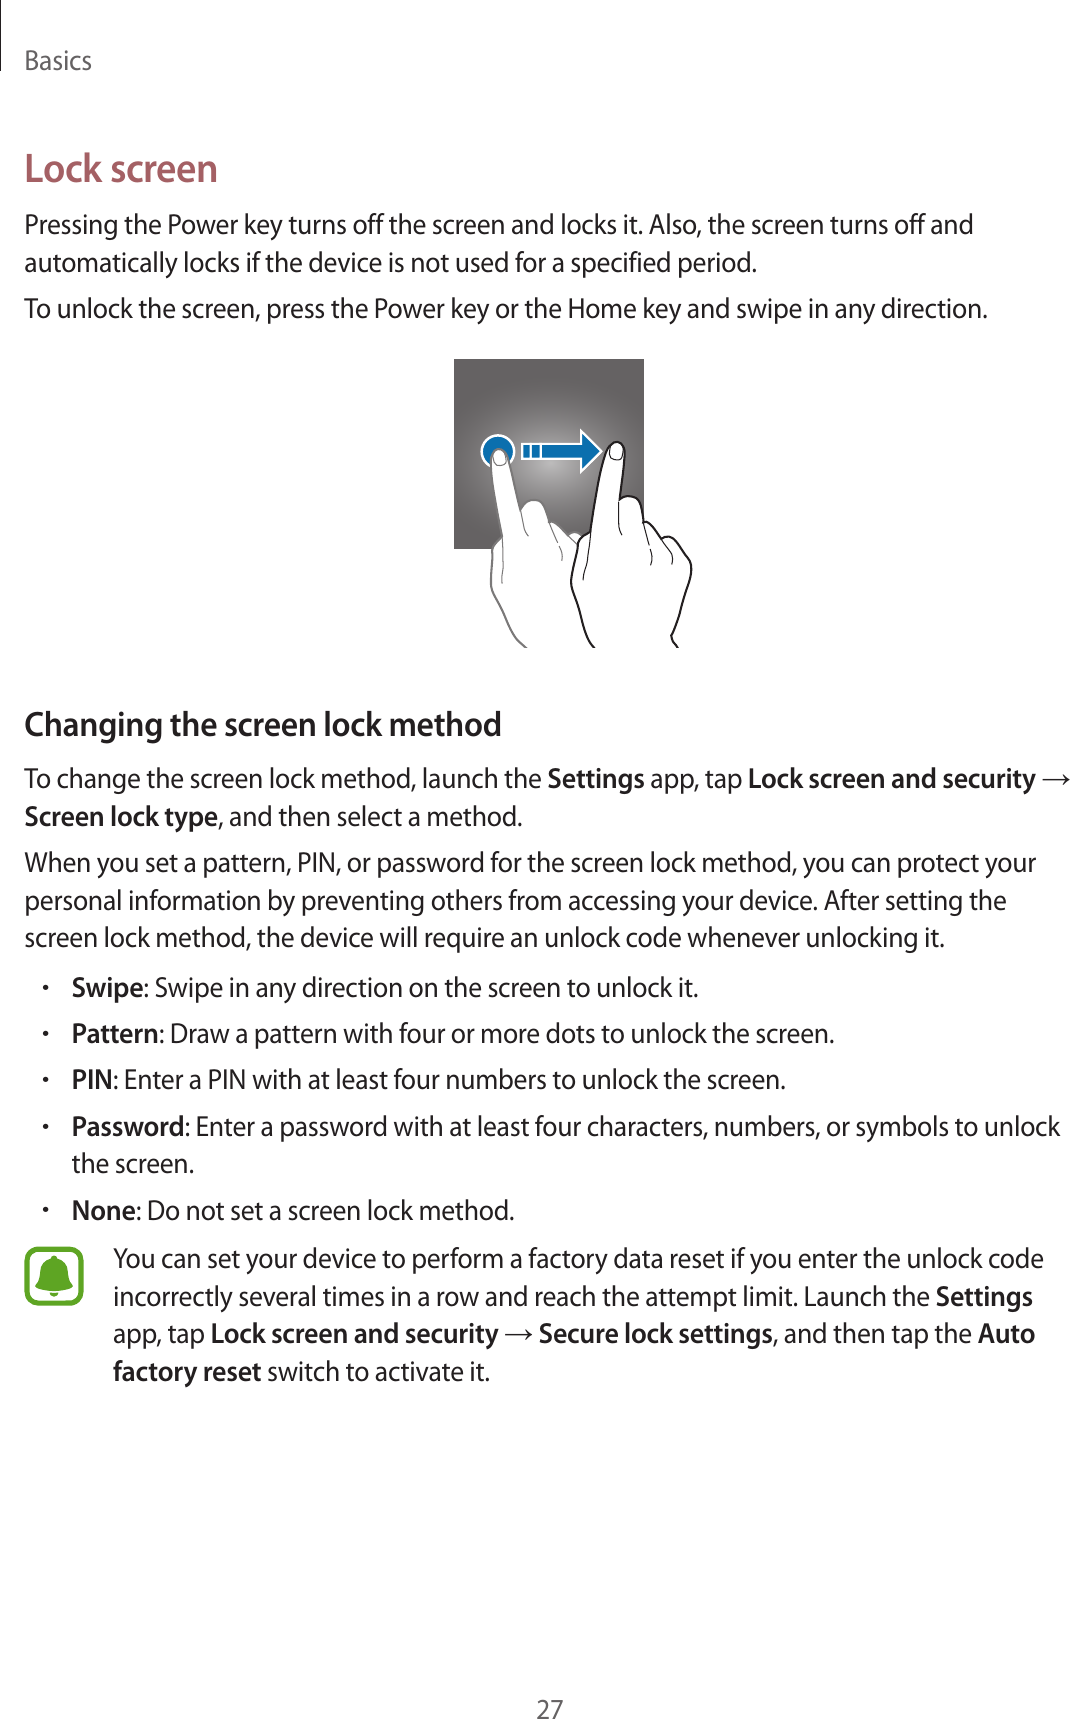 Basics27Lock screenPressing the Power key turns off the screen and locks it. Also, the screen turns off and automatically locks if the device is not used for a specified period.To unlock the screen, press the Power key or the Home key and swipe in any direction.Changing the screen lock methodTo change the screen lock method, launch the Settings app, tap Lock screen and security → Screen lock type, and then select a method.When you set a pattern, PIN, or password for the screen lock method, you can protect your personal information by preventing others from accessing your device. After setting the screen lock method, the device will require an unlock code whenever unlocking it.•Swipe: Swipe in any direction on the screen to unlock it.•Pattern: Draw a pattern with four or more dots to unlock the screen.•PIN: Enter a PIN with at least four numbers to unlock the screen.•Password: Enter a password with at least four characters, numbers, or symbols to unlock the screen.•None: Do not set a screen lock method.You can set your device to perform a factory data reset if you enter the unlock code incorrectly several times in a row and reach the attempt limit. Launch the Settings app, tap Lock screen and security → Secure lock settings, and then tap the Auto factory reset switch to activate it.